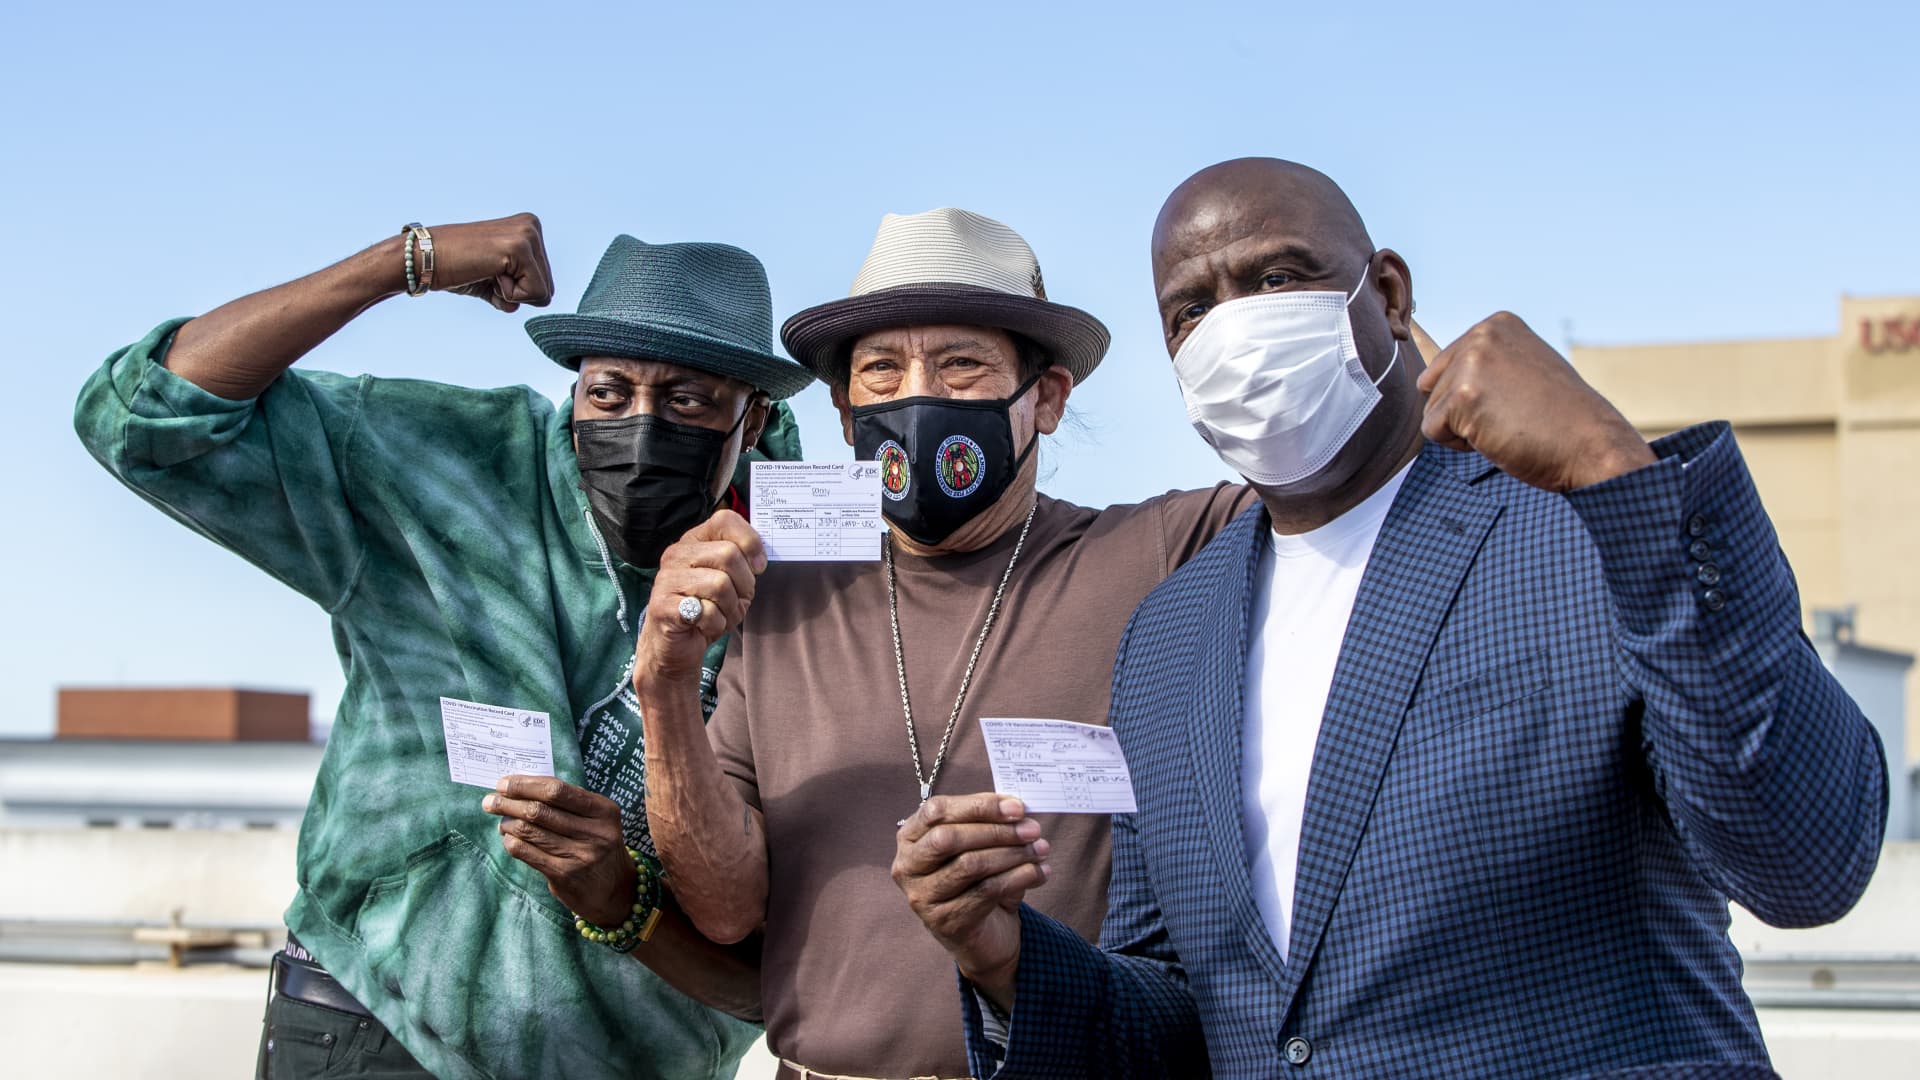 Arsenio Hall, left, Danny Trejo and Magic Johnson pose for a photo after they all got vaccine shots on the rooftop of parking structure at USC as a part of a vaccination awareness event at USC on March 24, 2021 in Los Angeles, California.